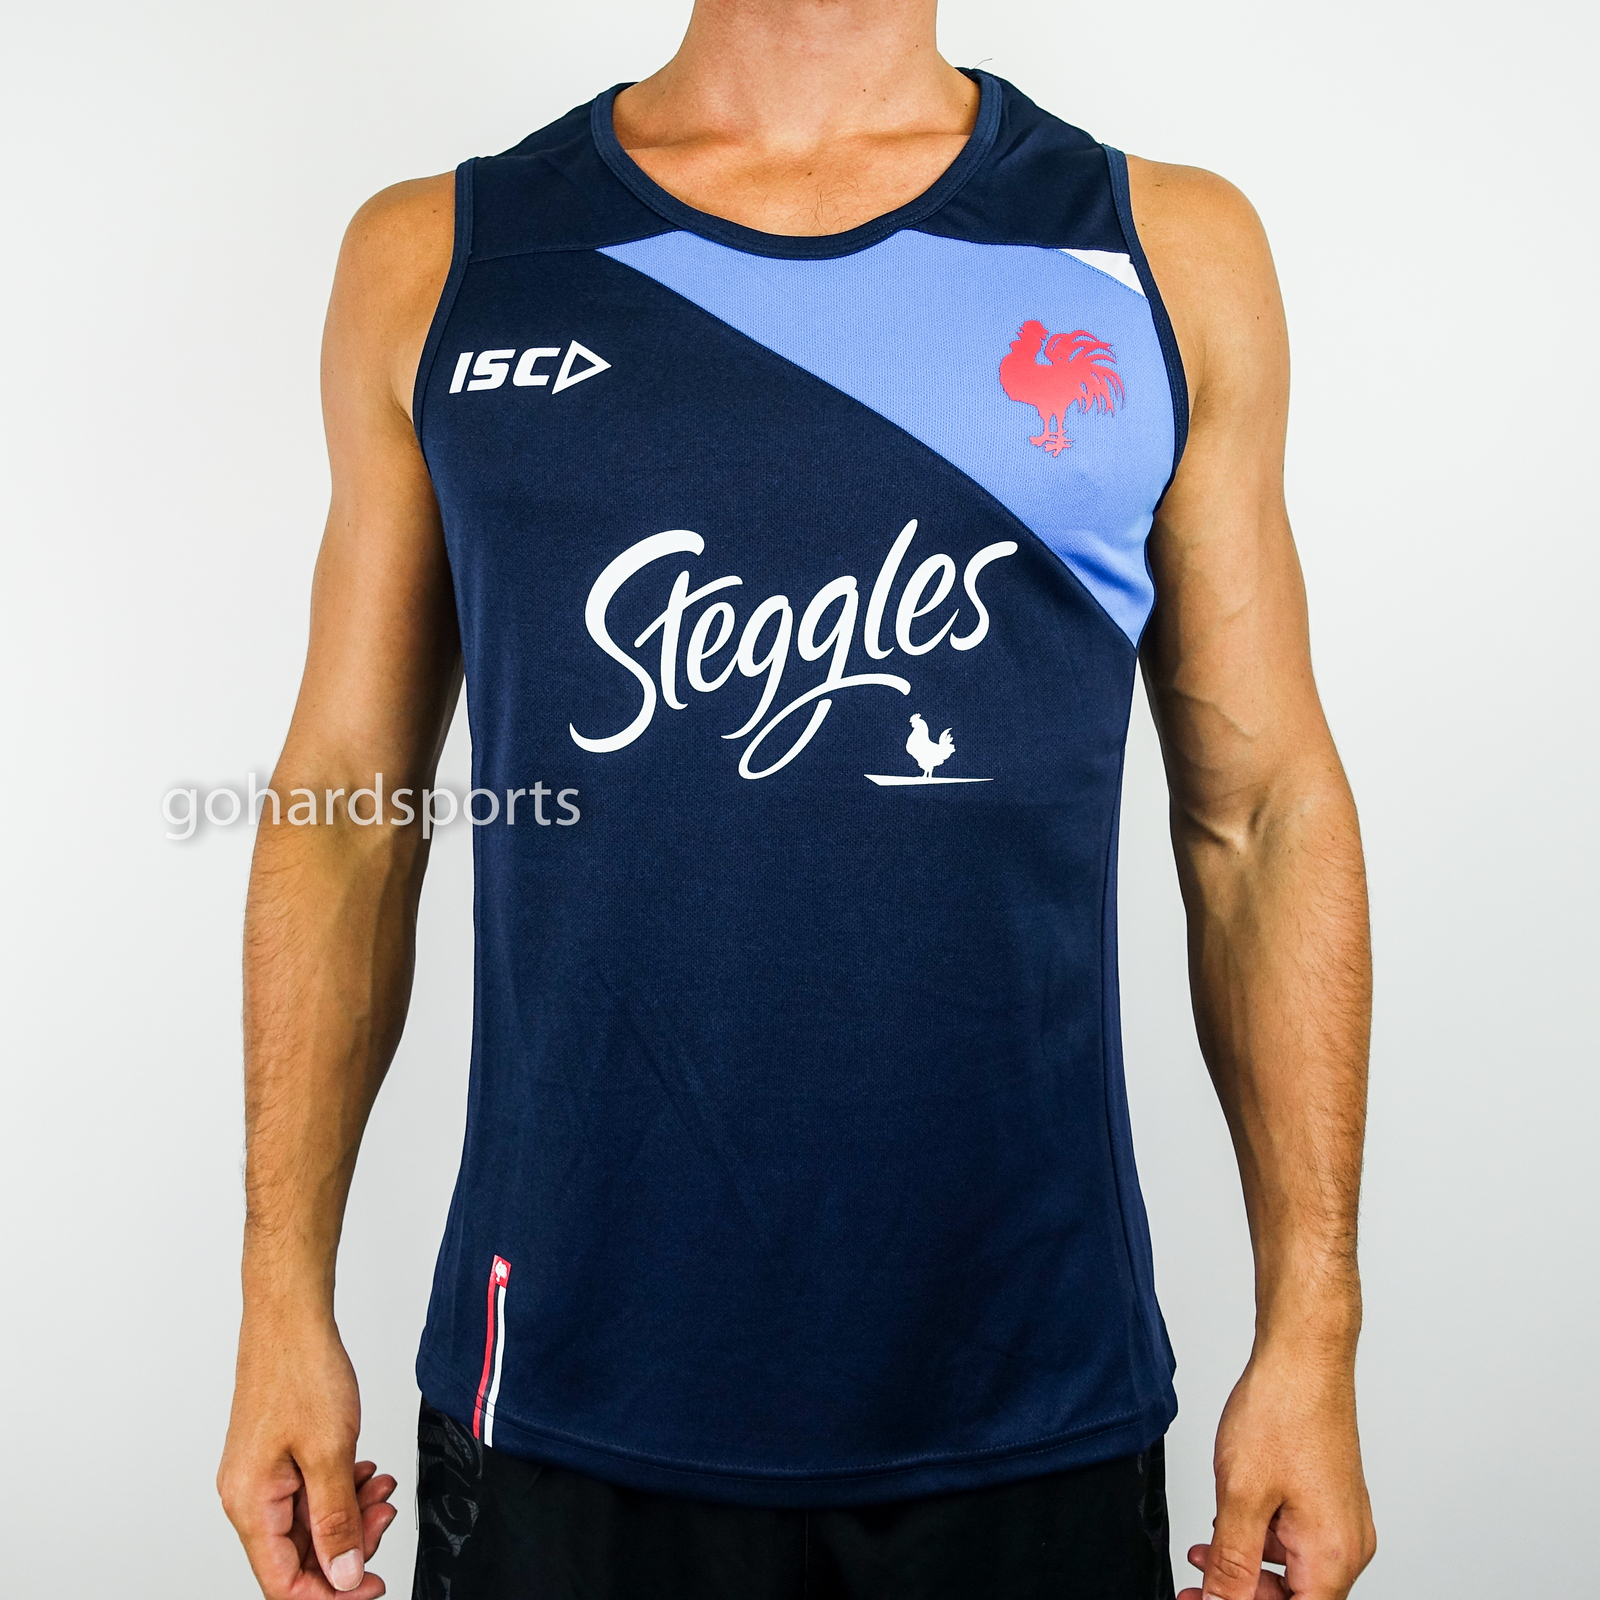 Sydney Roosters 2018 NRL Training Shorts Sizes Adults and Kids Sizes BNWT 